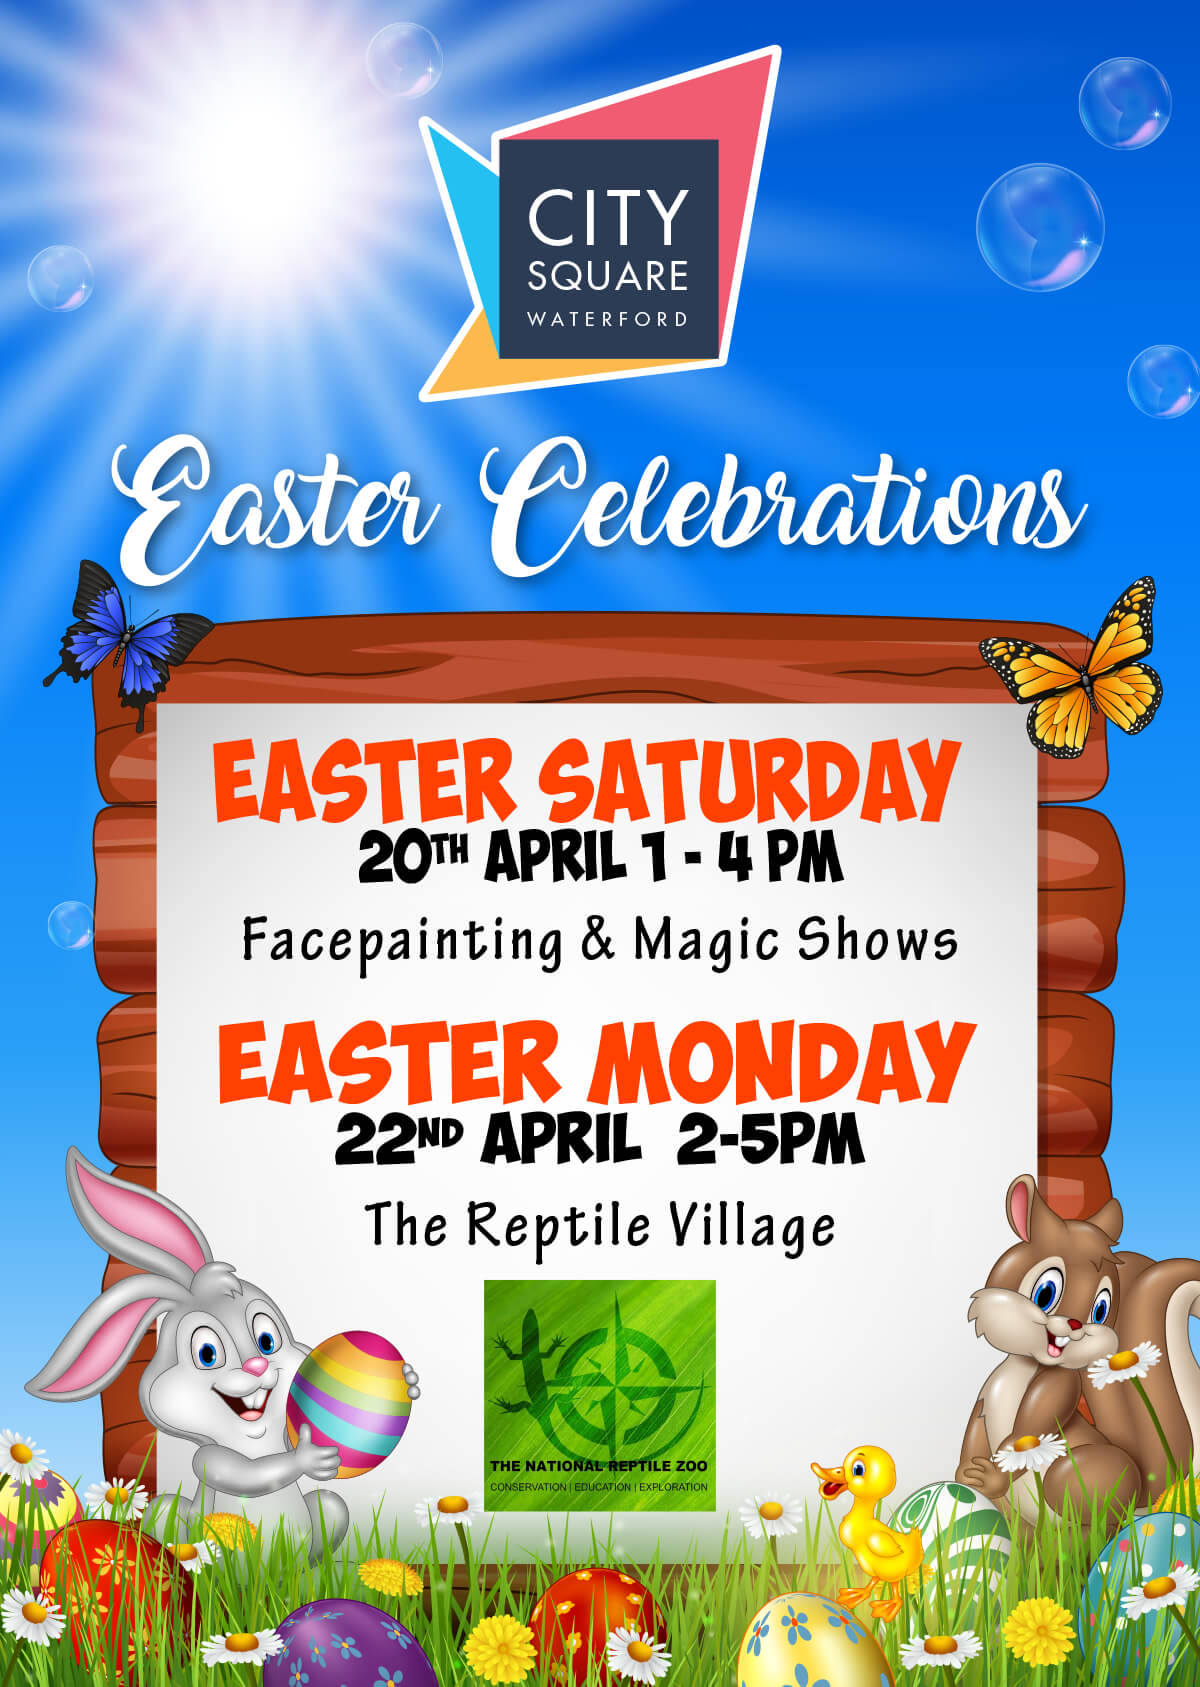 Easter Weekend Celebrations at City Square